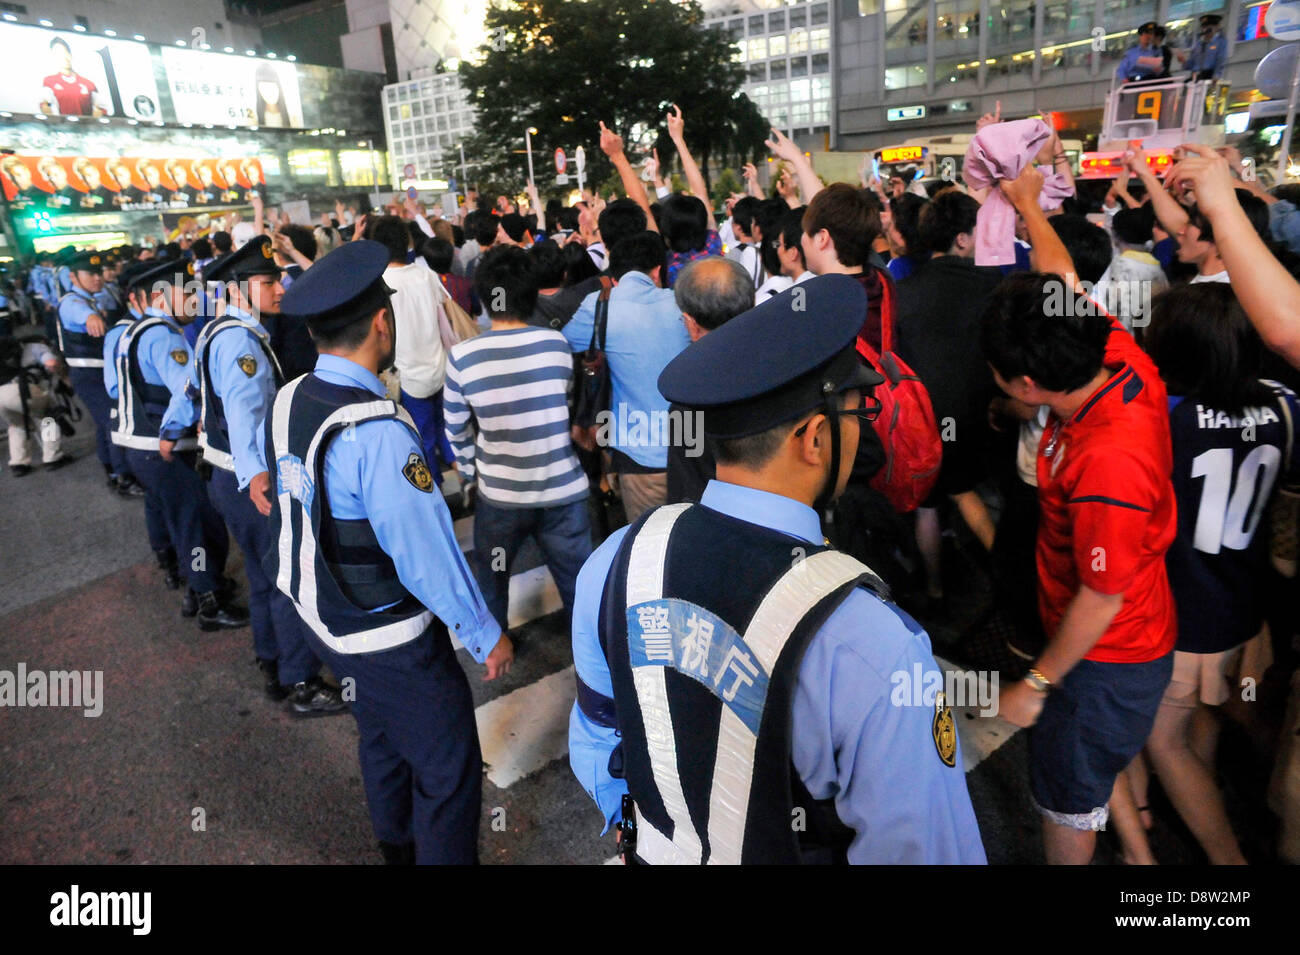 Saitama, Japan. 4th June 2013. June 4th, 2013 : Tokyo, Japan - Fans celebrated the Japan National Soccer team, which had a game of the final Asian qualifiers for the 2014 World Cup against Australia and cleared it, as police officers regulate them in front of Shibuya Station, Shibuya, Tokyo Japan on June 4, 2013.  (Photo by Koichiro Suzuki/AFLO/Alamy Live News) Stock Photo